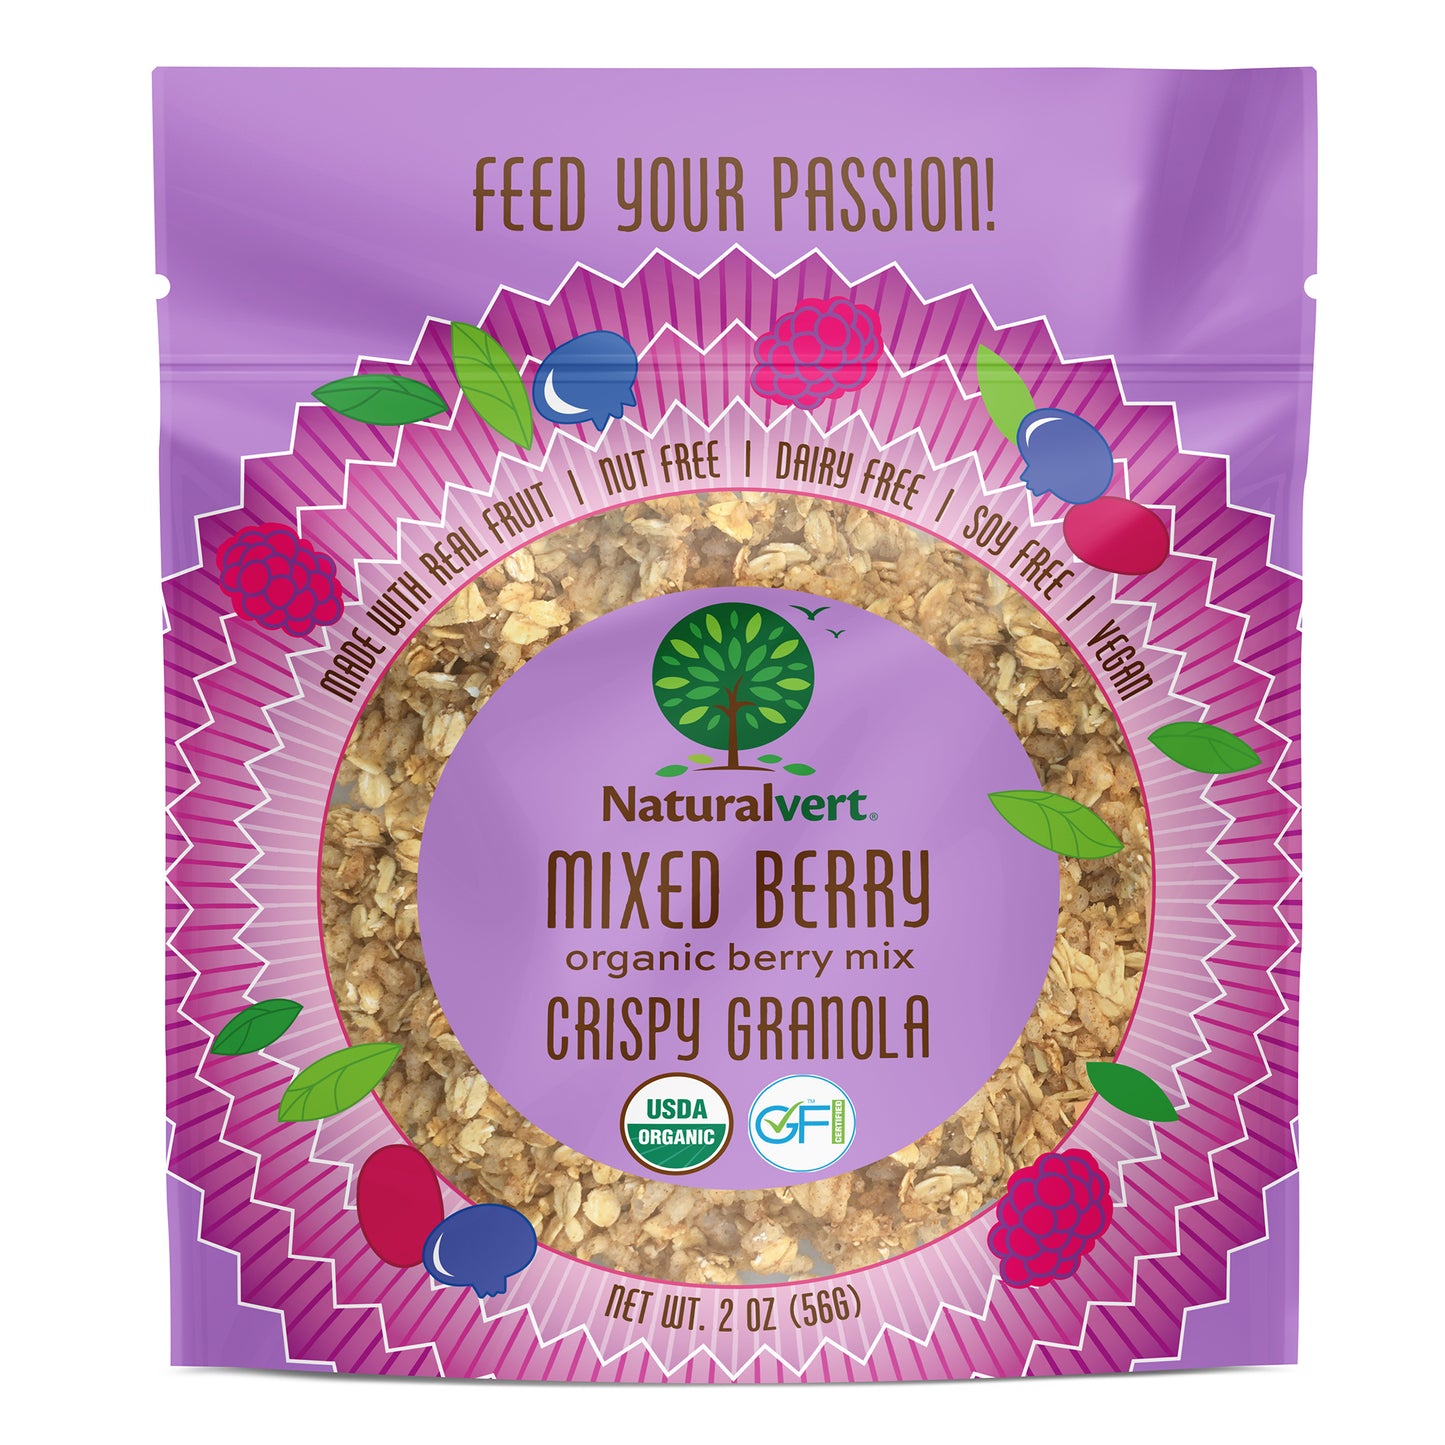 Organic, Gluten-free, vegan granola. made with real fruit. Nut free, soy free, dairy free. flavor Mixed berry 2oz